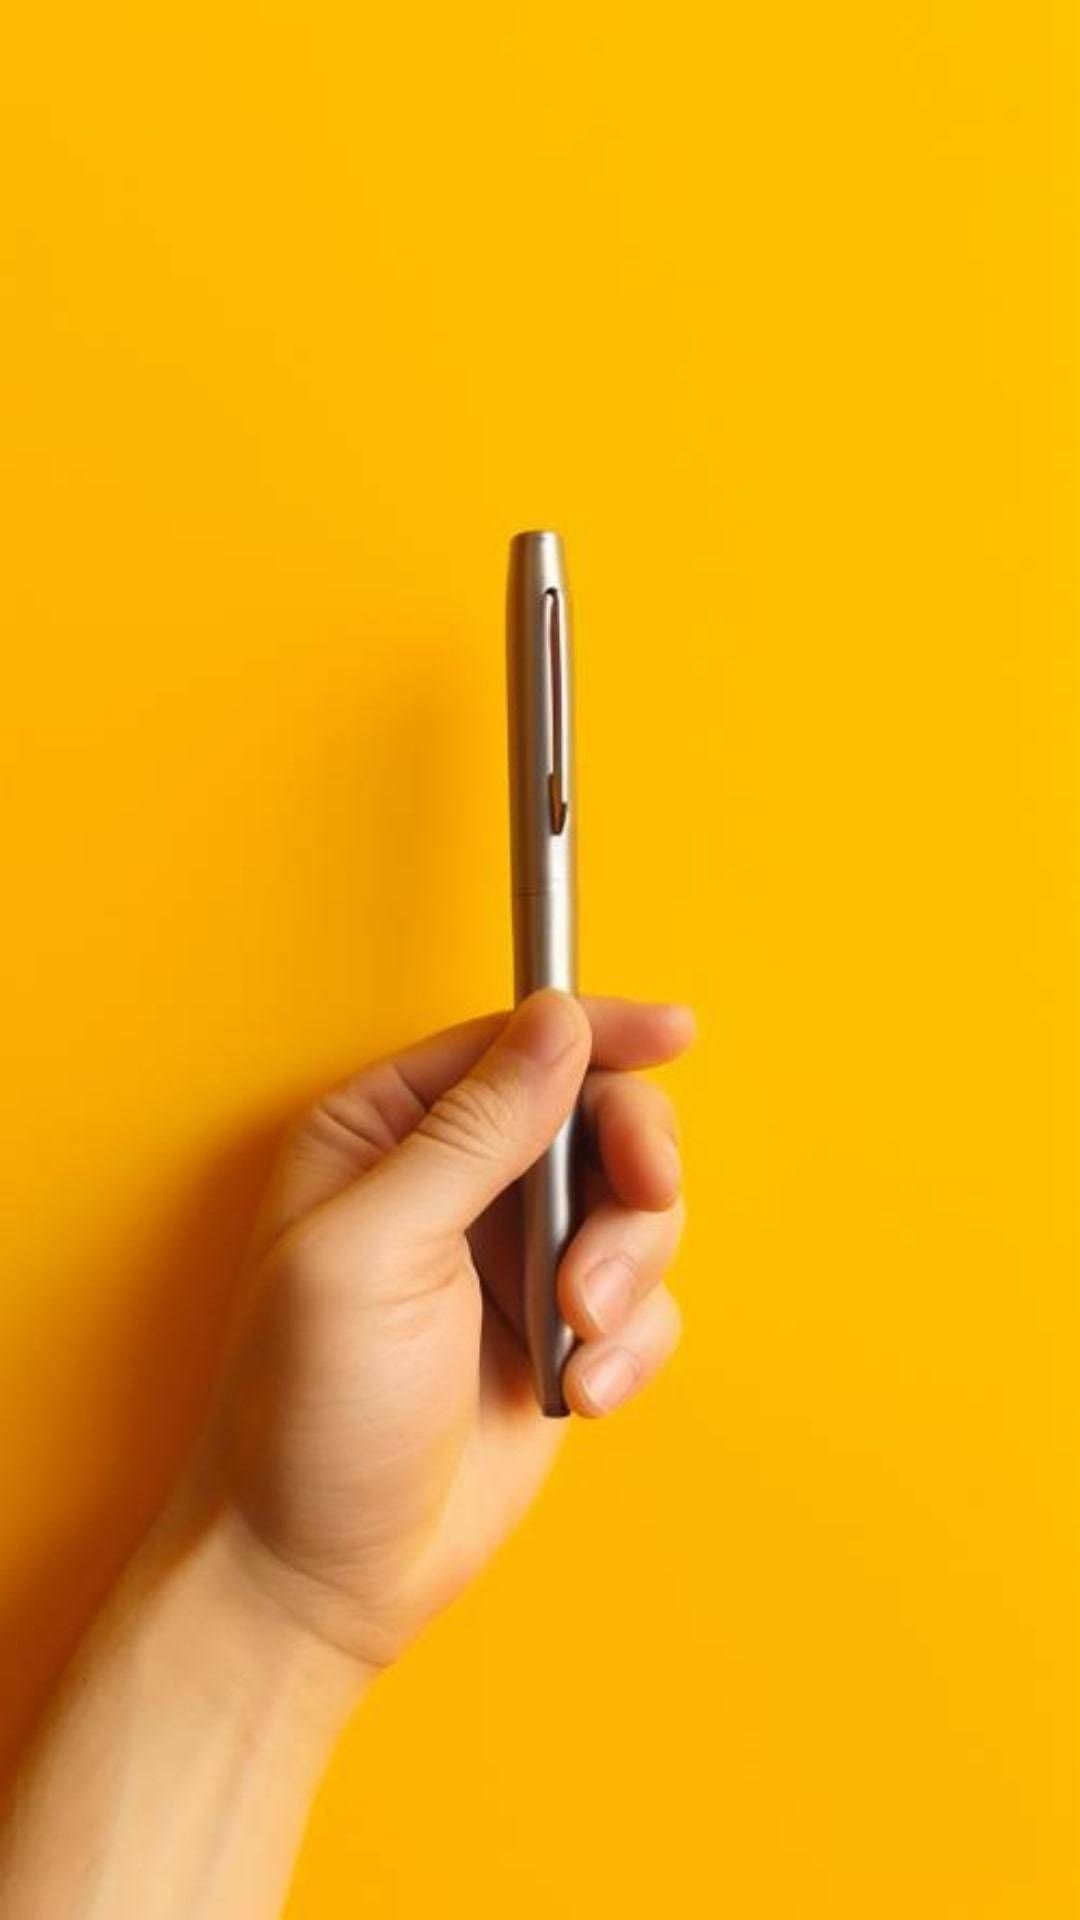 A hand holding a pen against a yellow background, illustrating the concept of writing, creativity, or productivity.